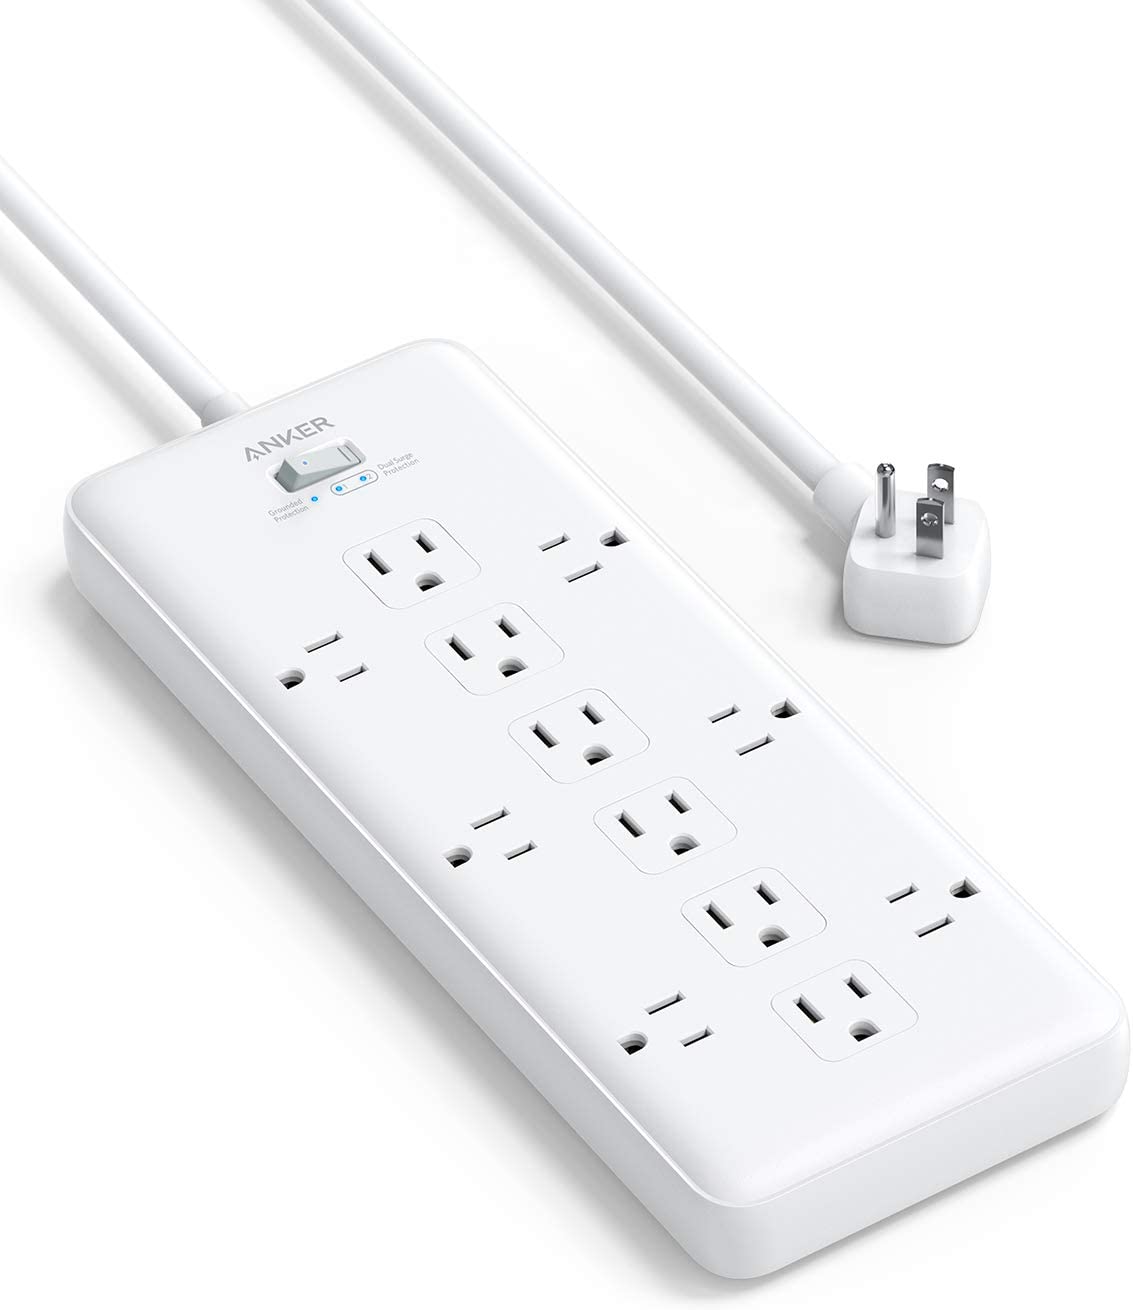 Anker Power Strip Surge Protector with 12 Outlets, 1875W Output, 8000 Joules $21.99